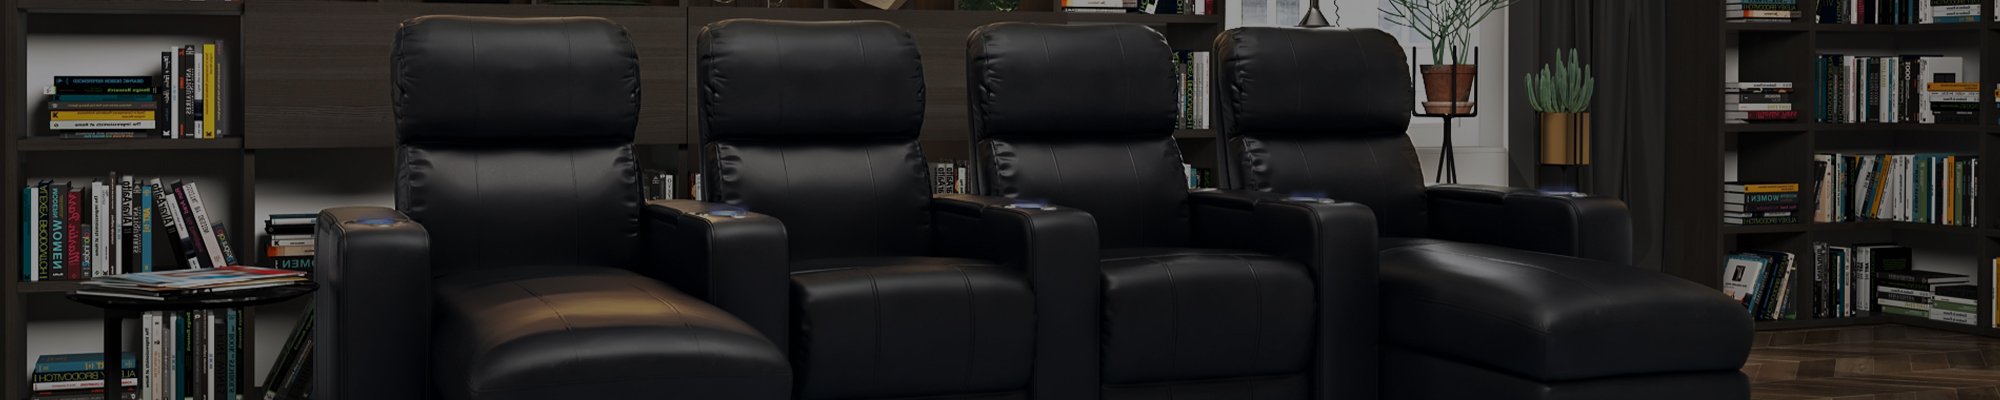 Which is the Best Theater Style Seat for Your Needs?